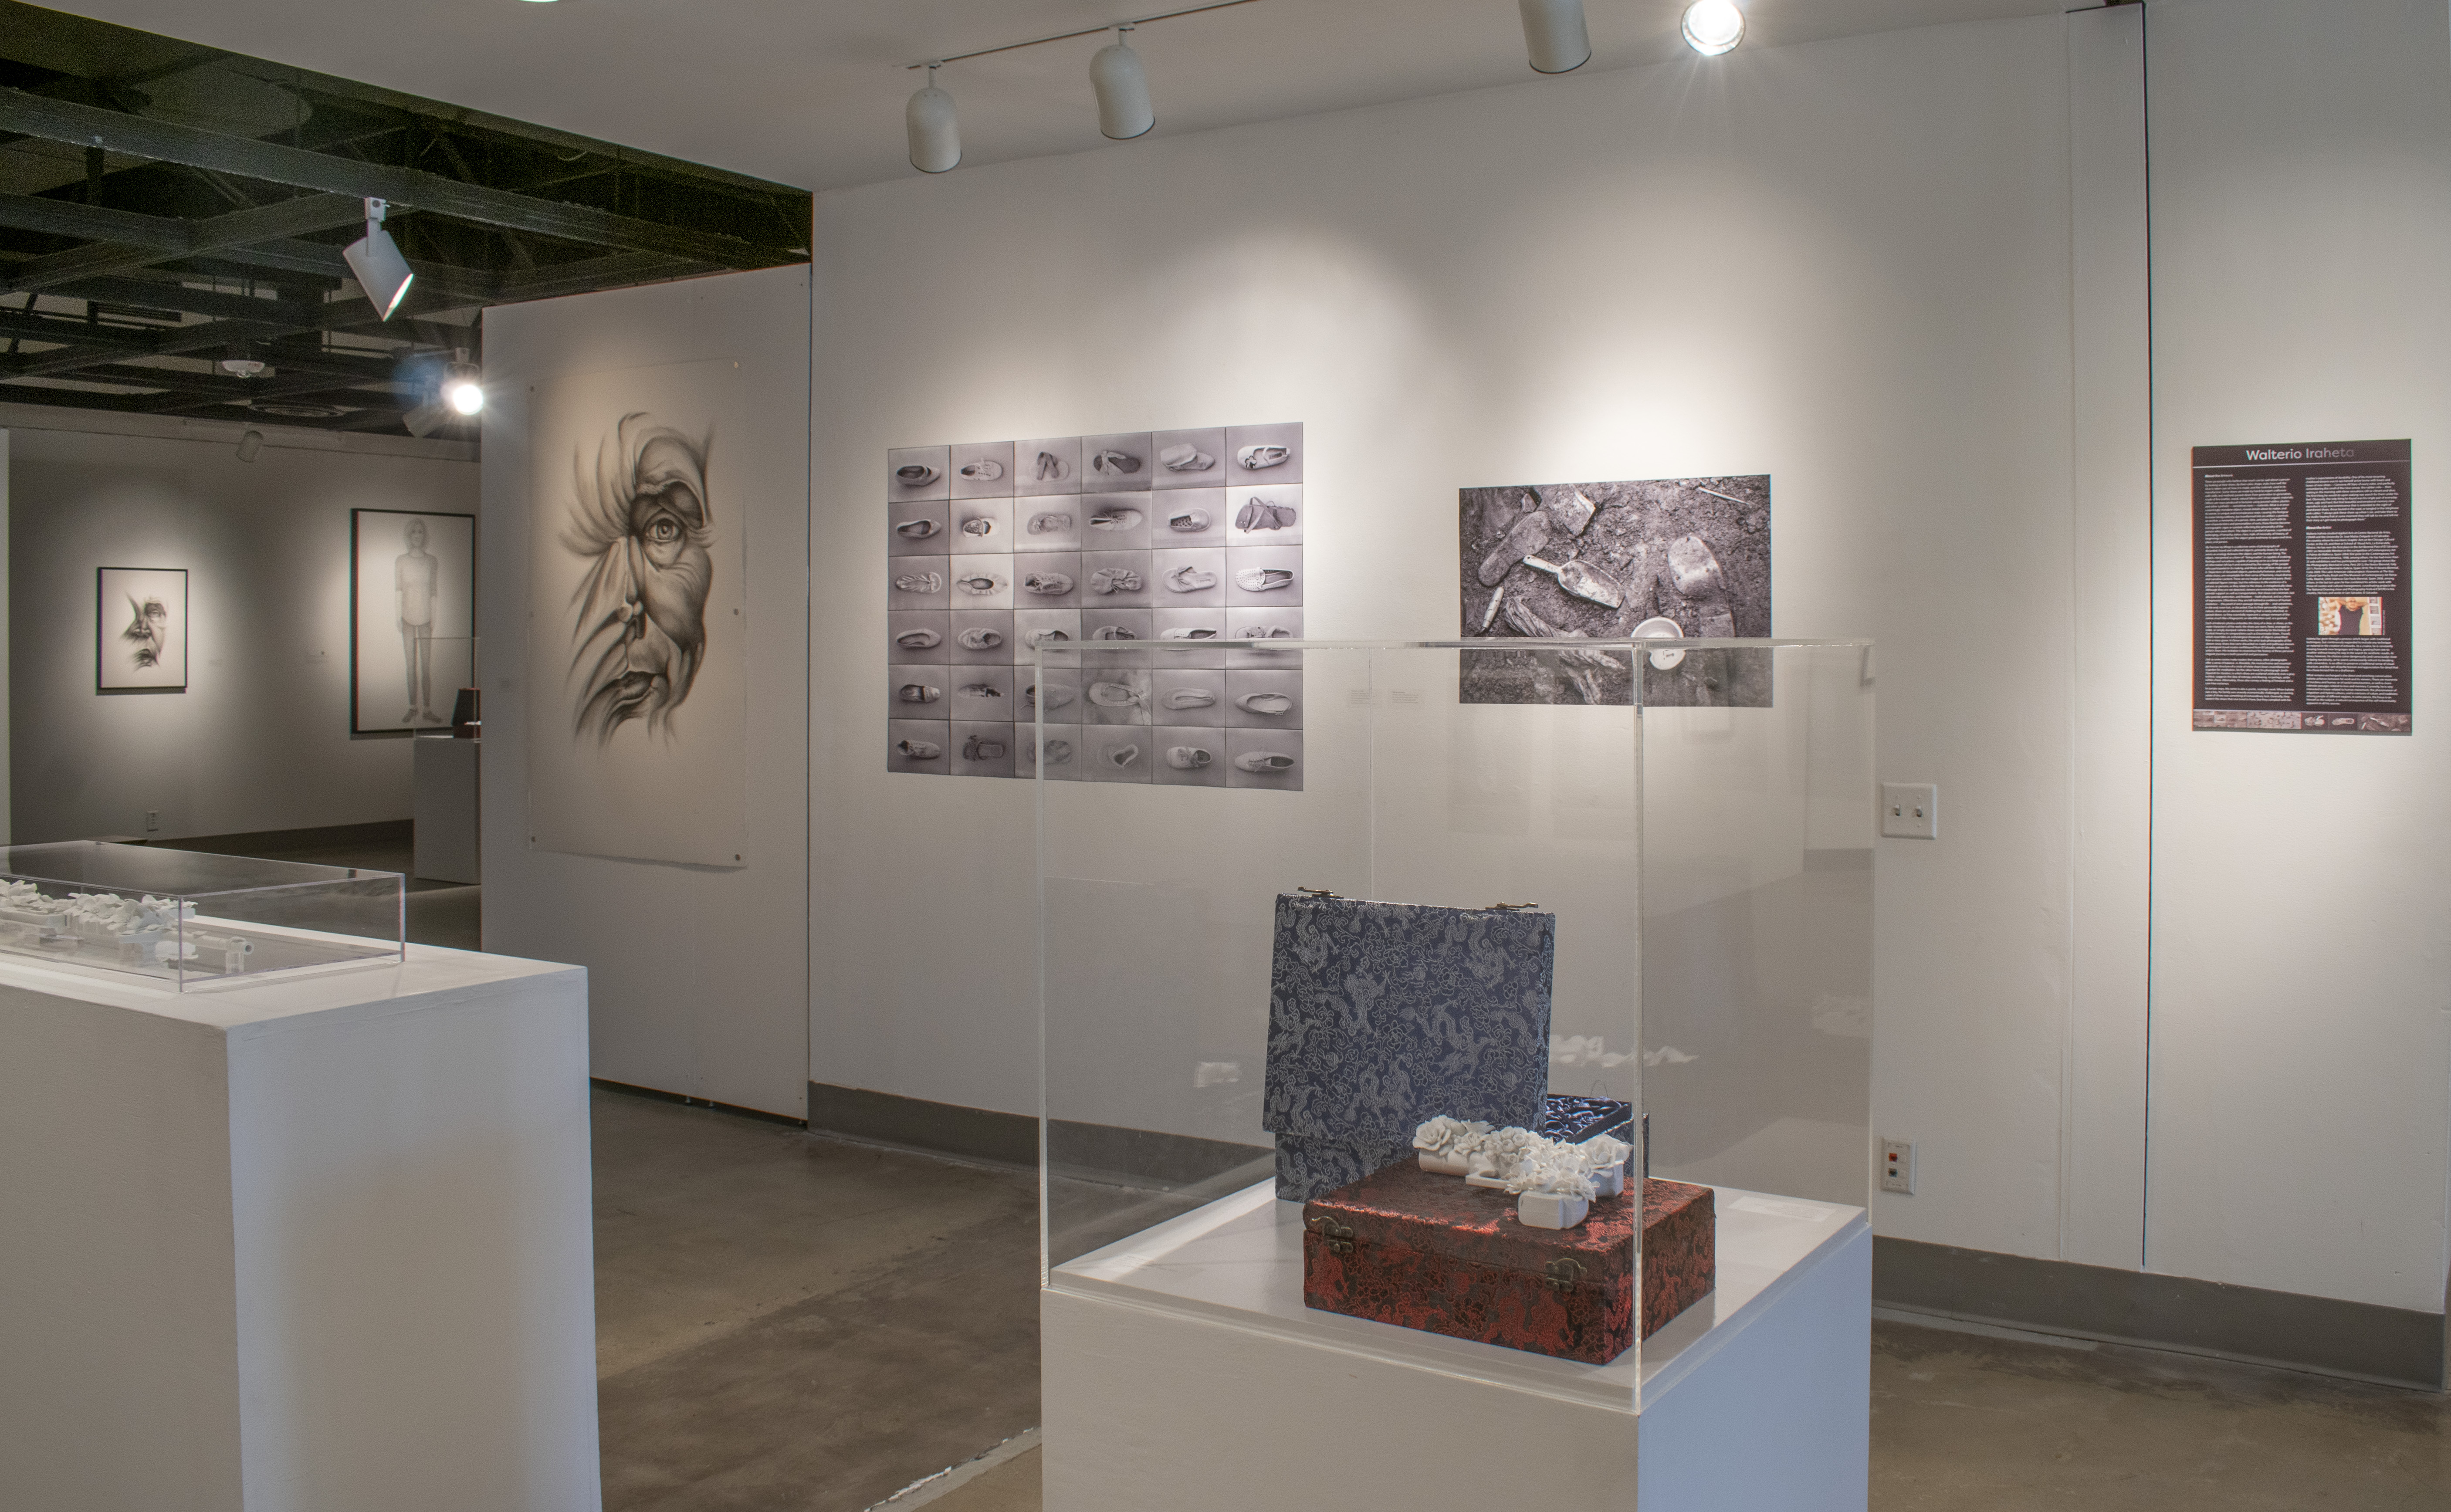 Installation View, Corridor of Gallery, Black, White & Shades of Grey Exhibition, Jan. 18, 2022 to Mar. 27, 2022.